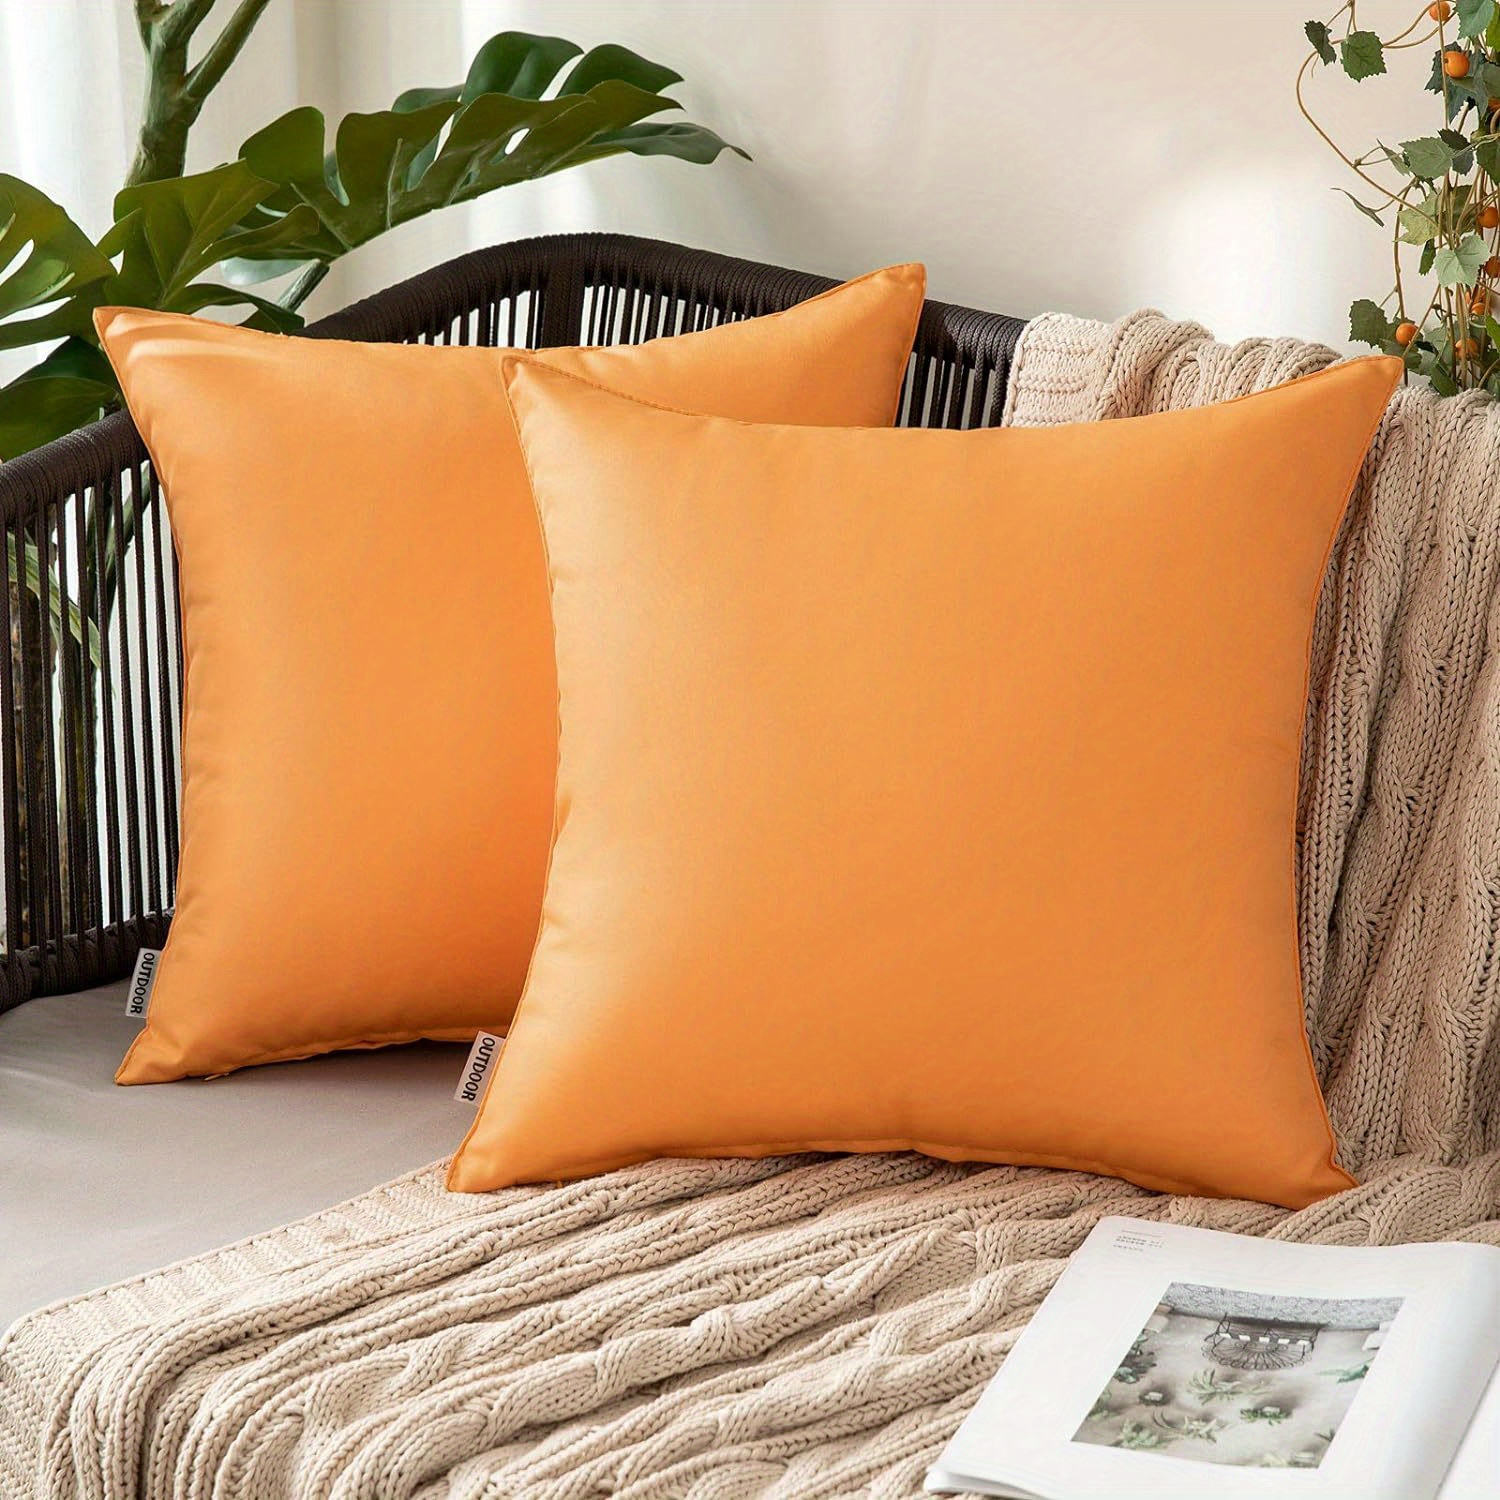 

Pack Of 2 Decorative Outdoor Waterproof Pillow Covers Garden Cushion Sham Throw Pillowcase Shell For Spring Patio Tent Couch 18x18 Inch Orange Yellow